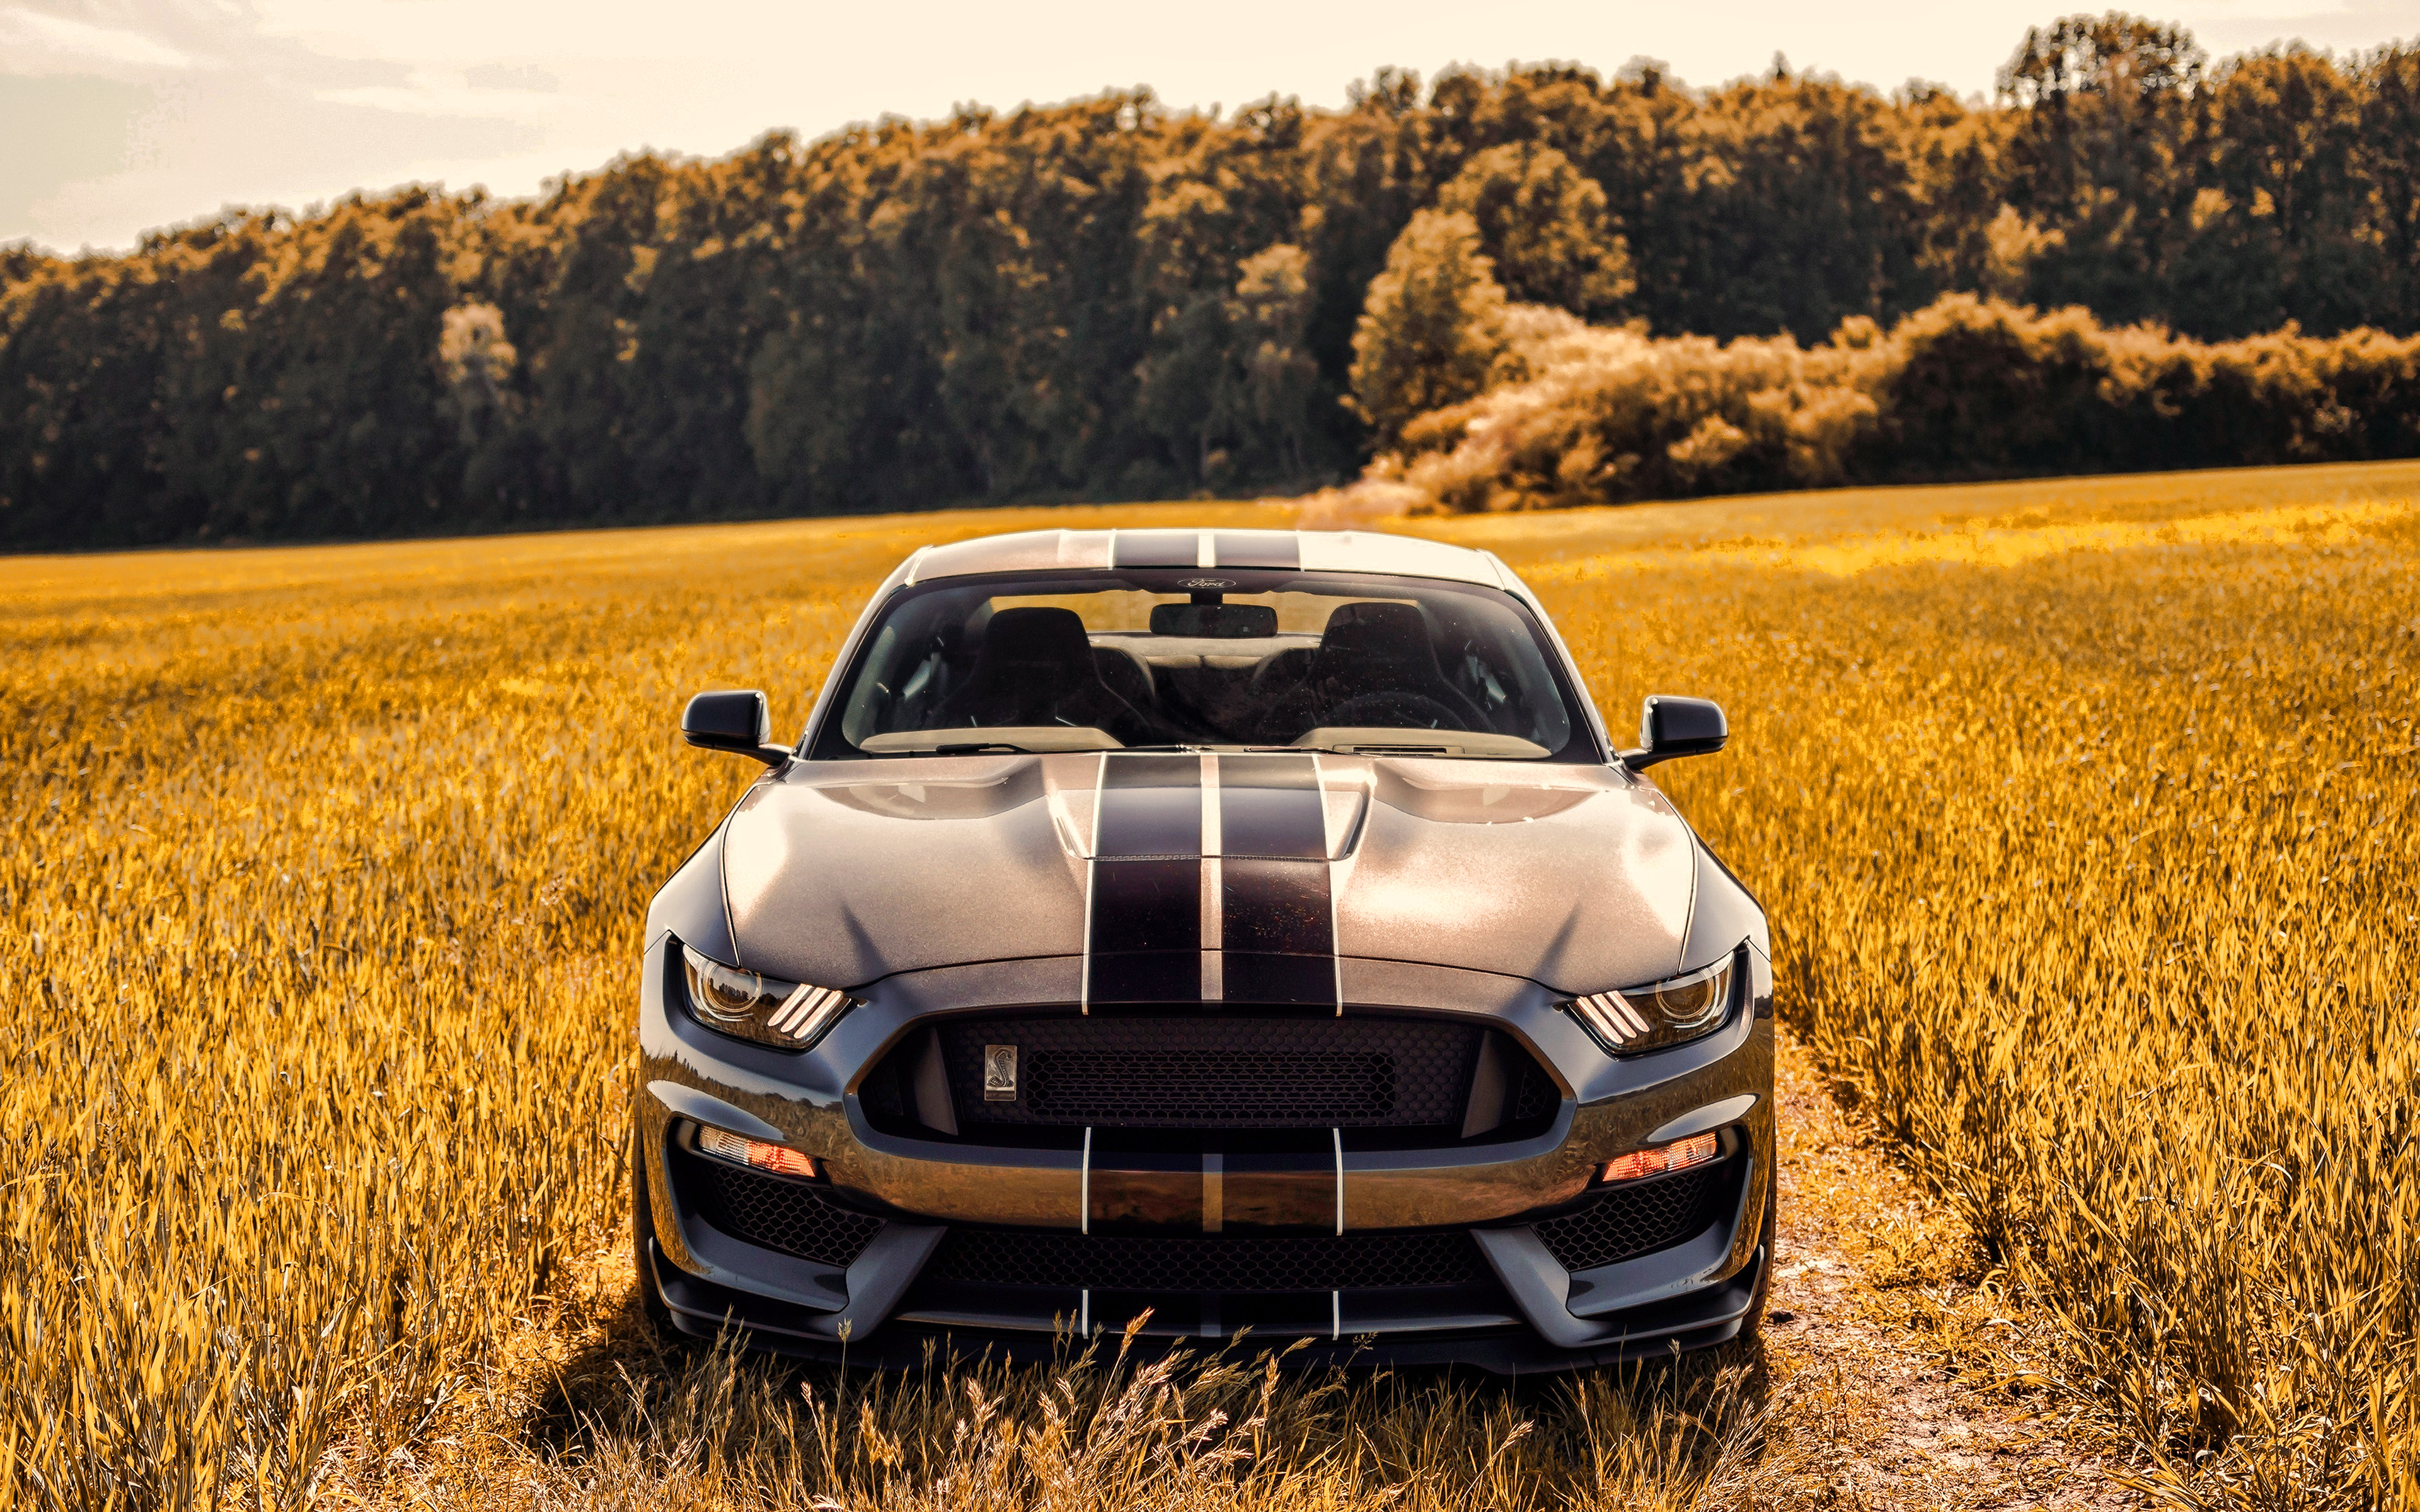 Ford Mustang Shelby Gt350, 4k, Offroad, 2019 Cars, - Off Road Mustang - HD Wallpaper 